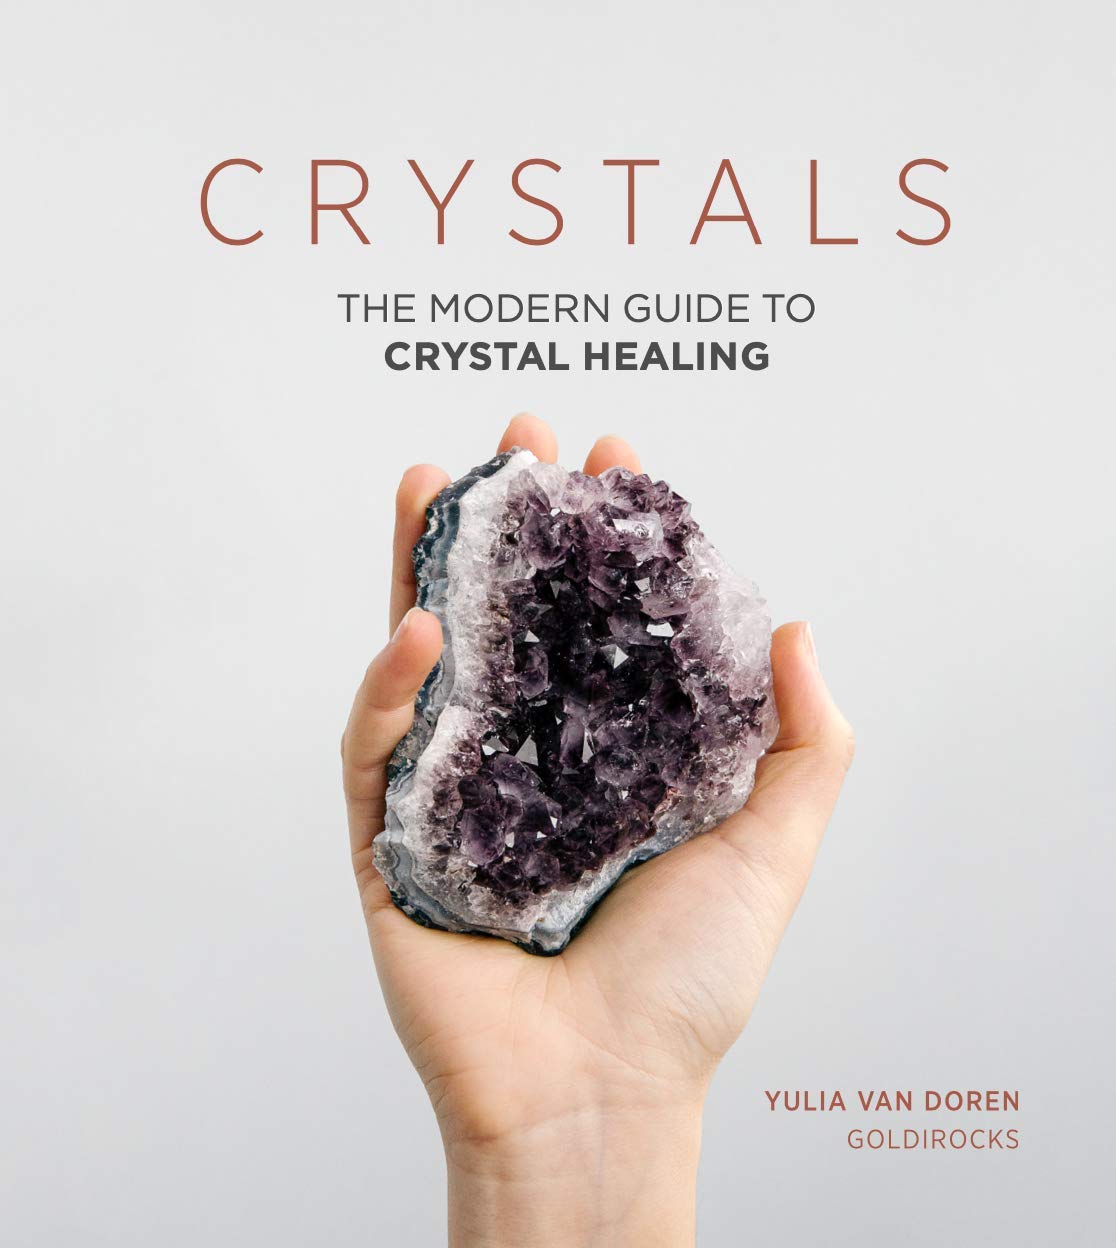 Crystals: The Modern Guide to Crystal Healing Book by Yulia Van Doren. What to do with Crystals. Crystal Guide for Beginners. 